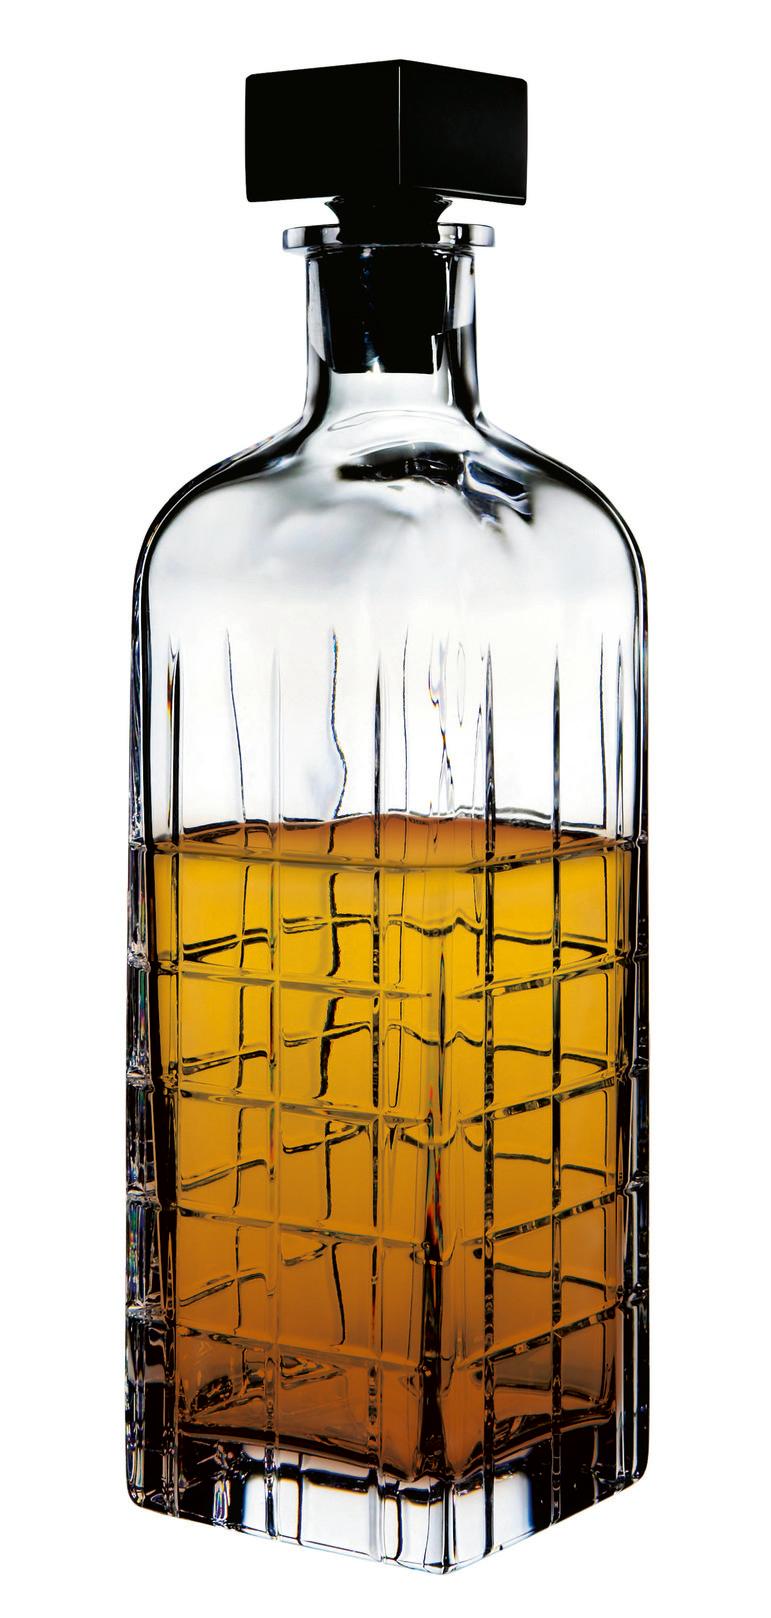 Street Decanter from Orrefors holds 35 oz and is ideal for serving spirits. The decanter has a checked motif of straight lines inspired by the criss-cross streets and avenues of Manhattan, New York, with a square, black stopper providing contrast to